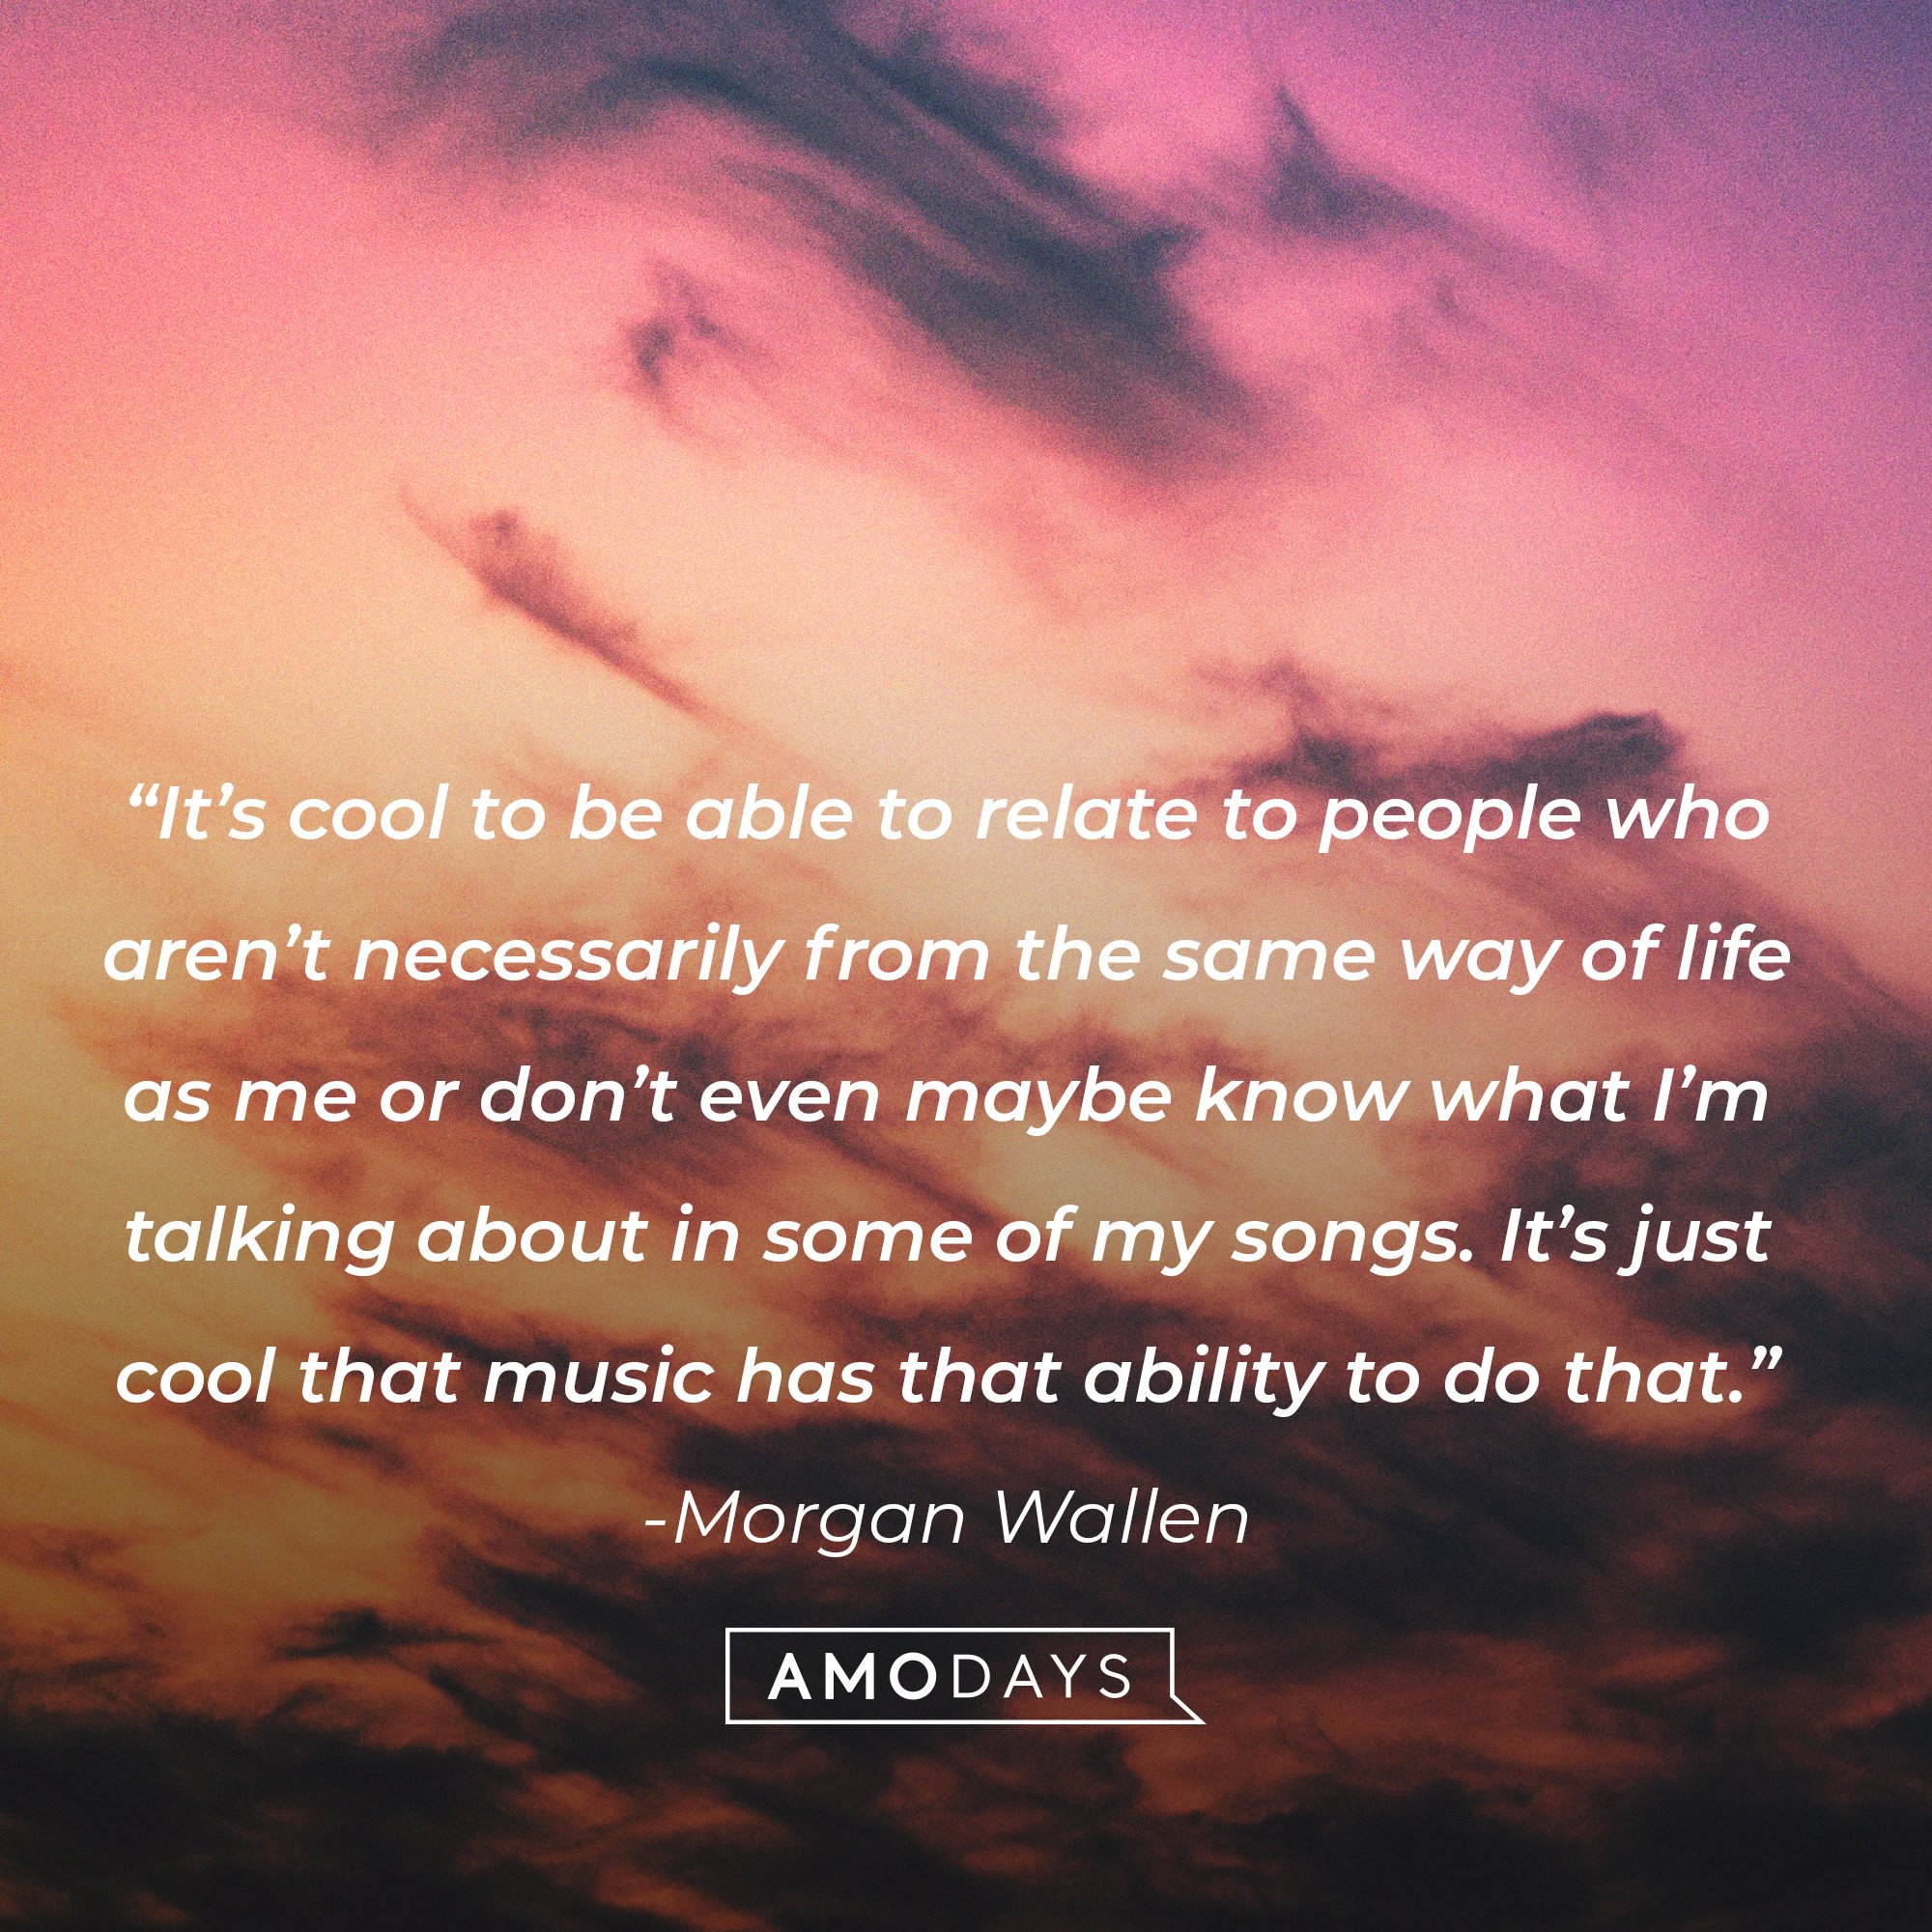  Morgan Wallen’s quote: “It’s cool to be able to relate to people who aren’t necessarily from the same way of life as me or don’t even maybe know what I’m talking about in some of my songs. It’s just cool that music has that ability to do that.” | Image: AmoDays